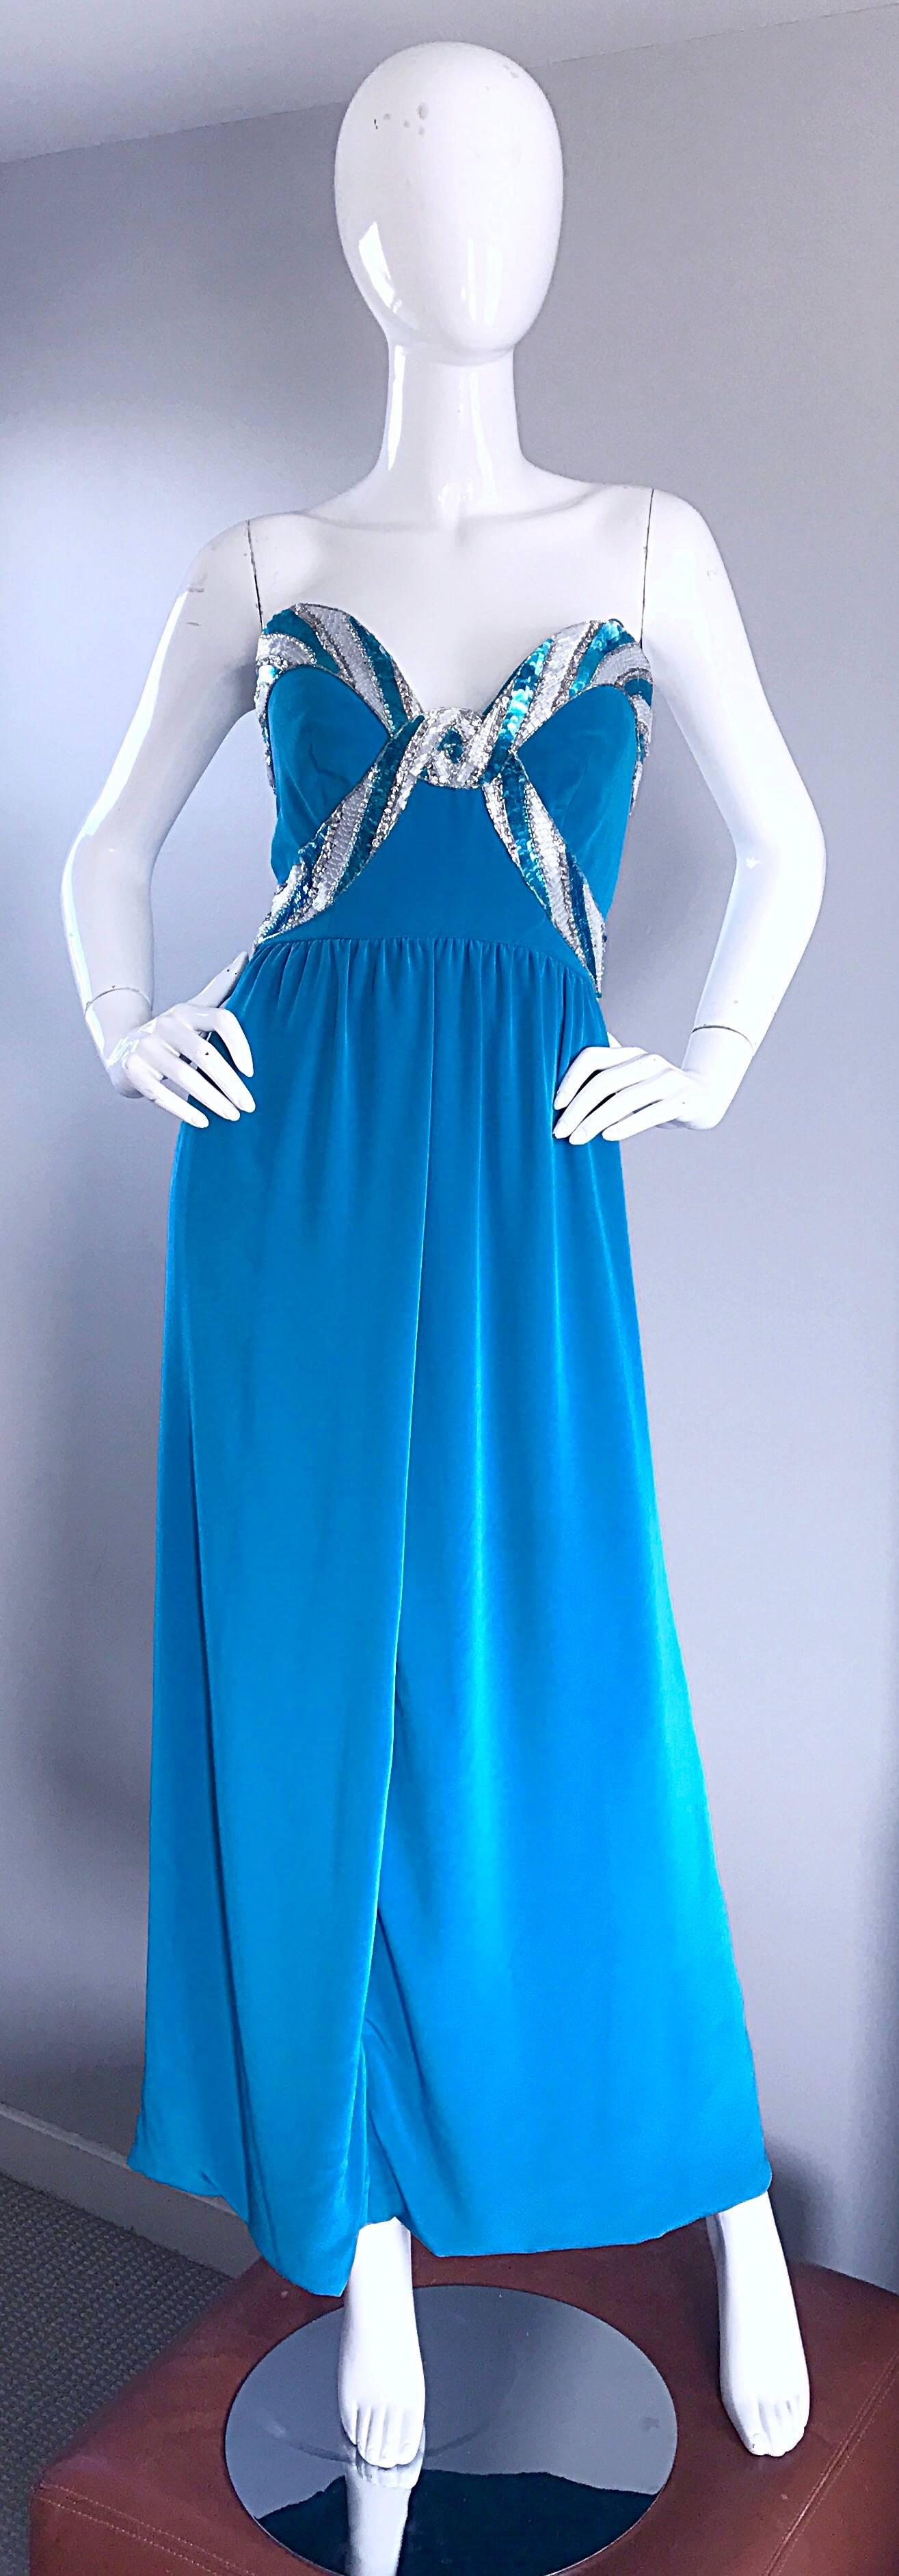 Gorgeous vintage BOB MACKIE turquoise/ teal blue strapless gown! Striking vibrant color! Strapless fit, with a boned bodice that features hundreds of hand-sewn sequins in silver and blue. Hidden zipper up the back with hook-and-eye closure. Grecian